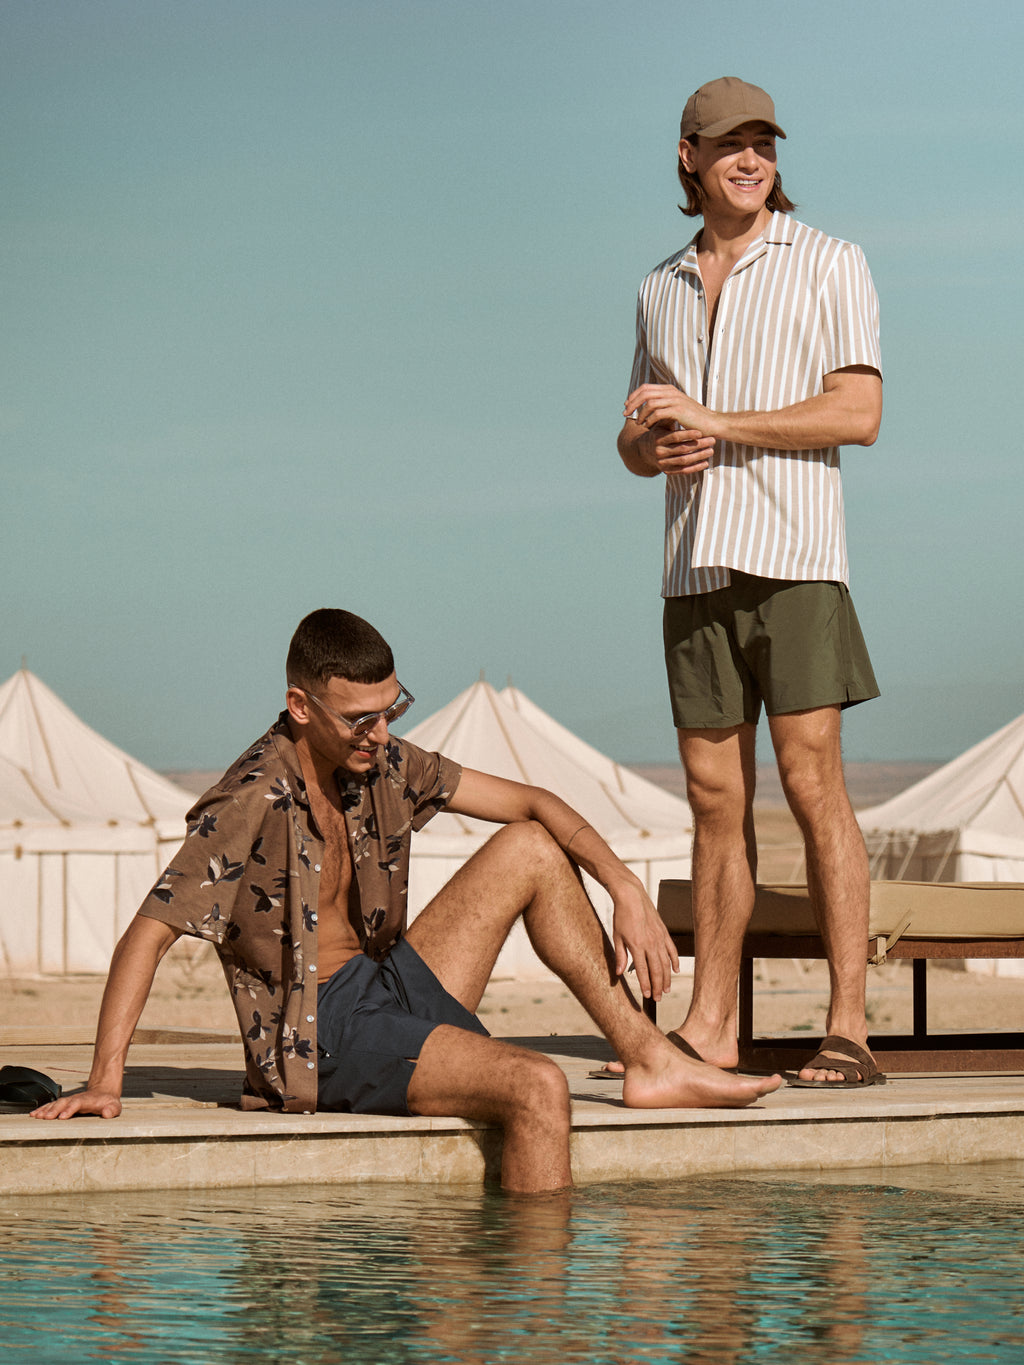 Two male models wearing different swim shorts and short-sleeved shirts by a pool